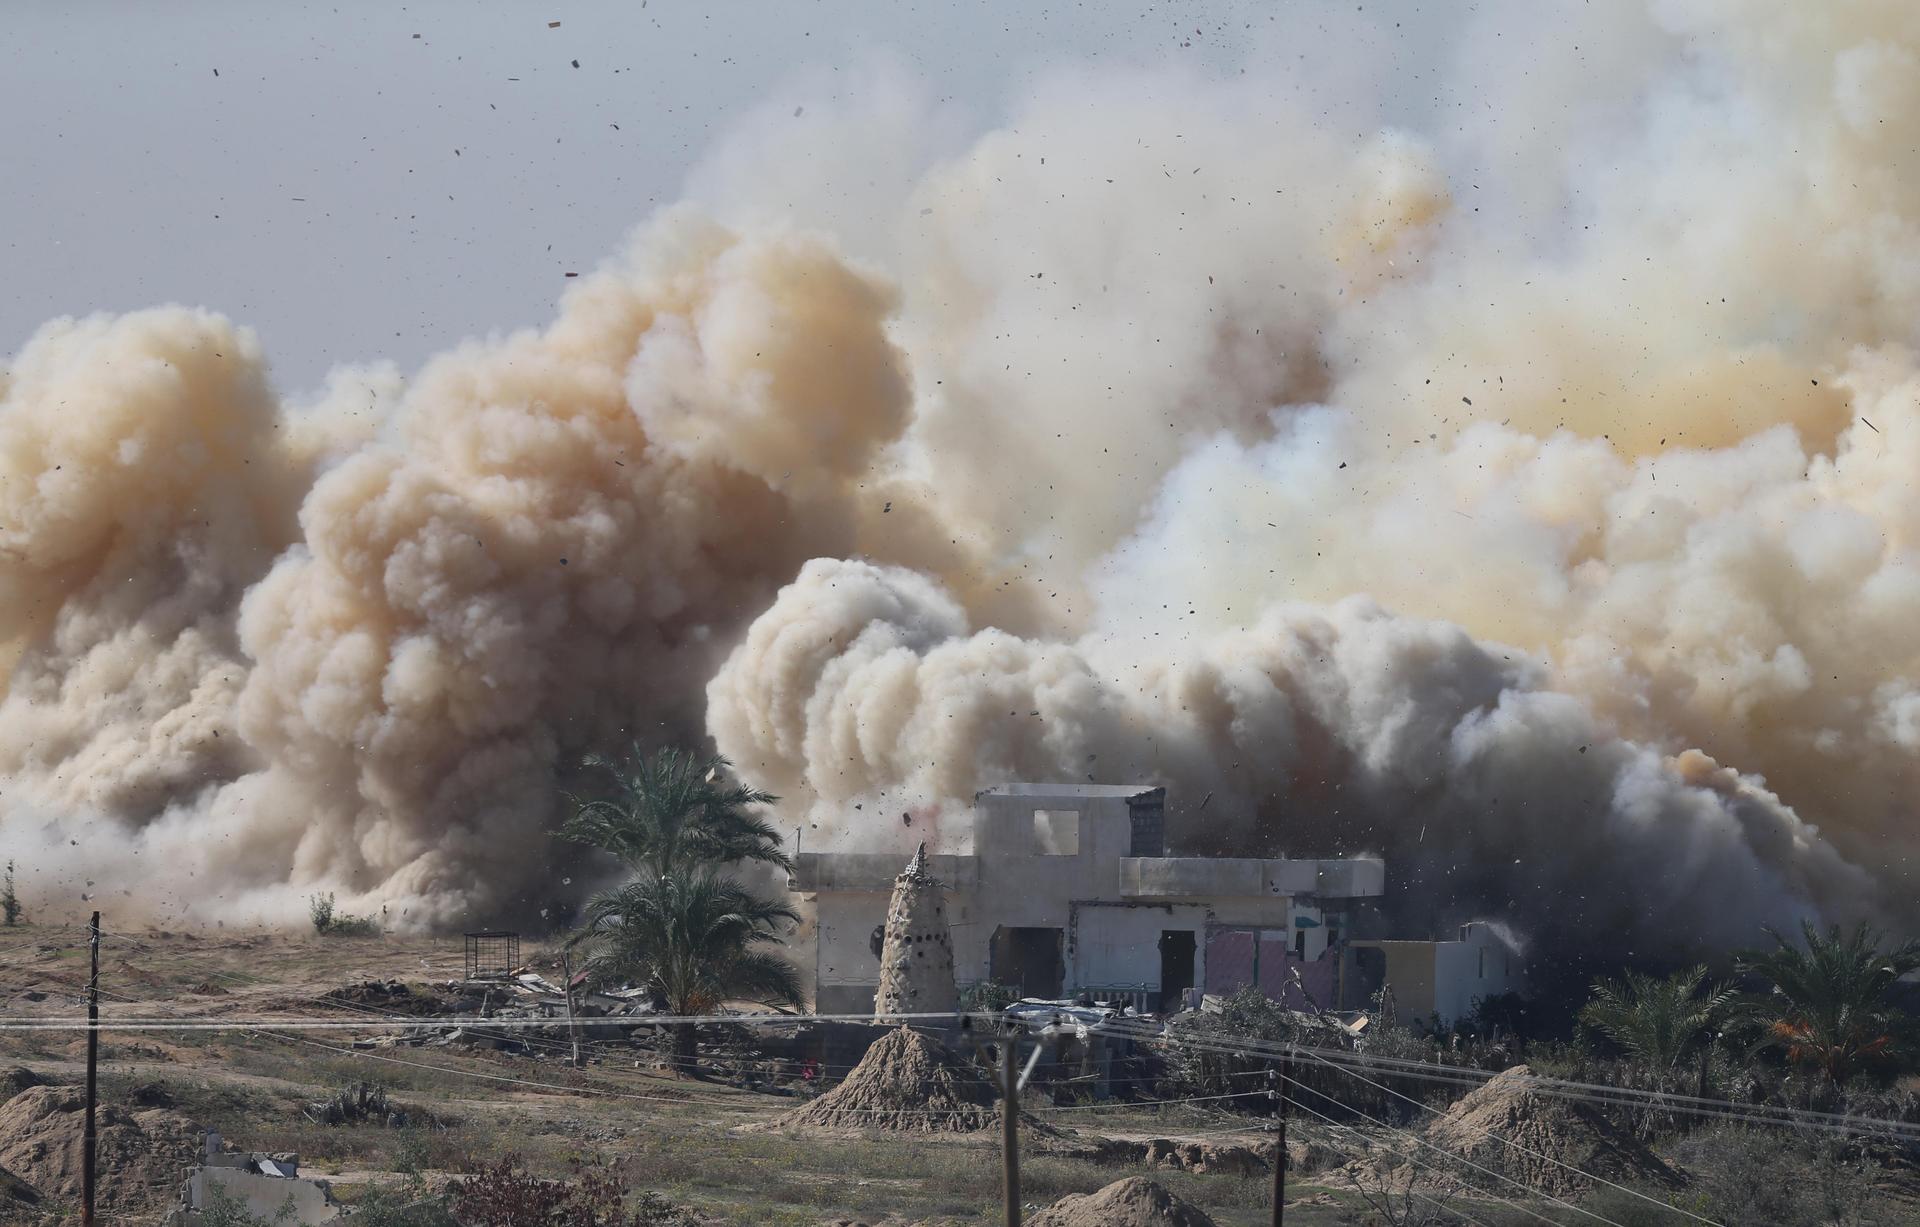 Smoke rises as a house is blown up by Egyptian security forces in northern Sinai. The government is trying to choke off the militant group, Ansar Bayt al-Maqdis, which has pledged its allegiance to ISIS. 